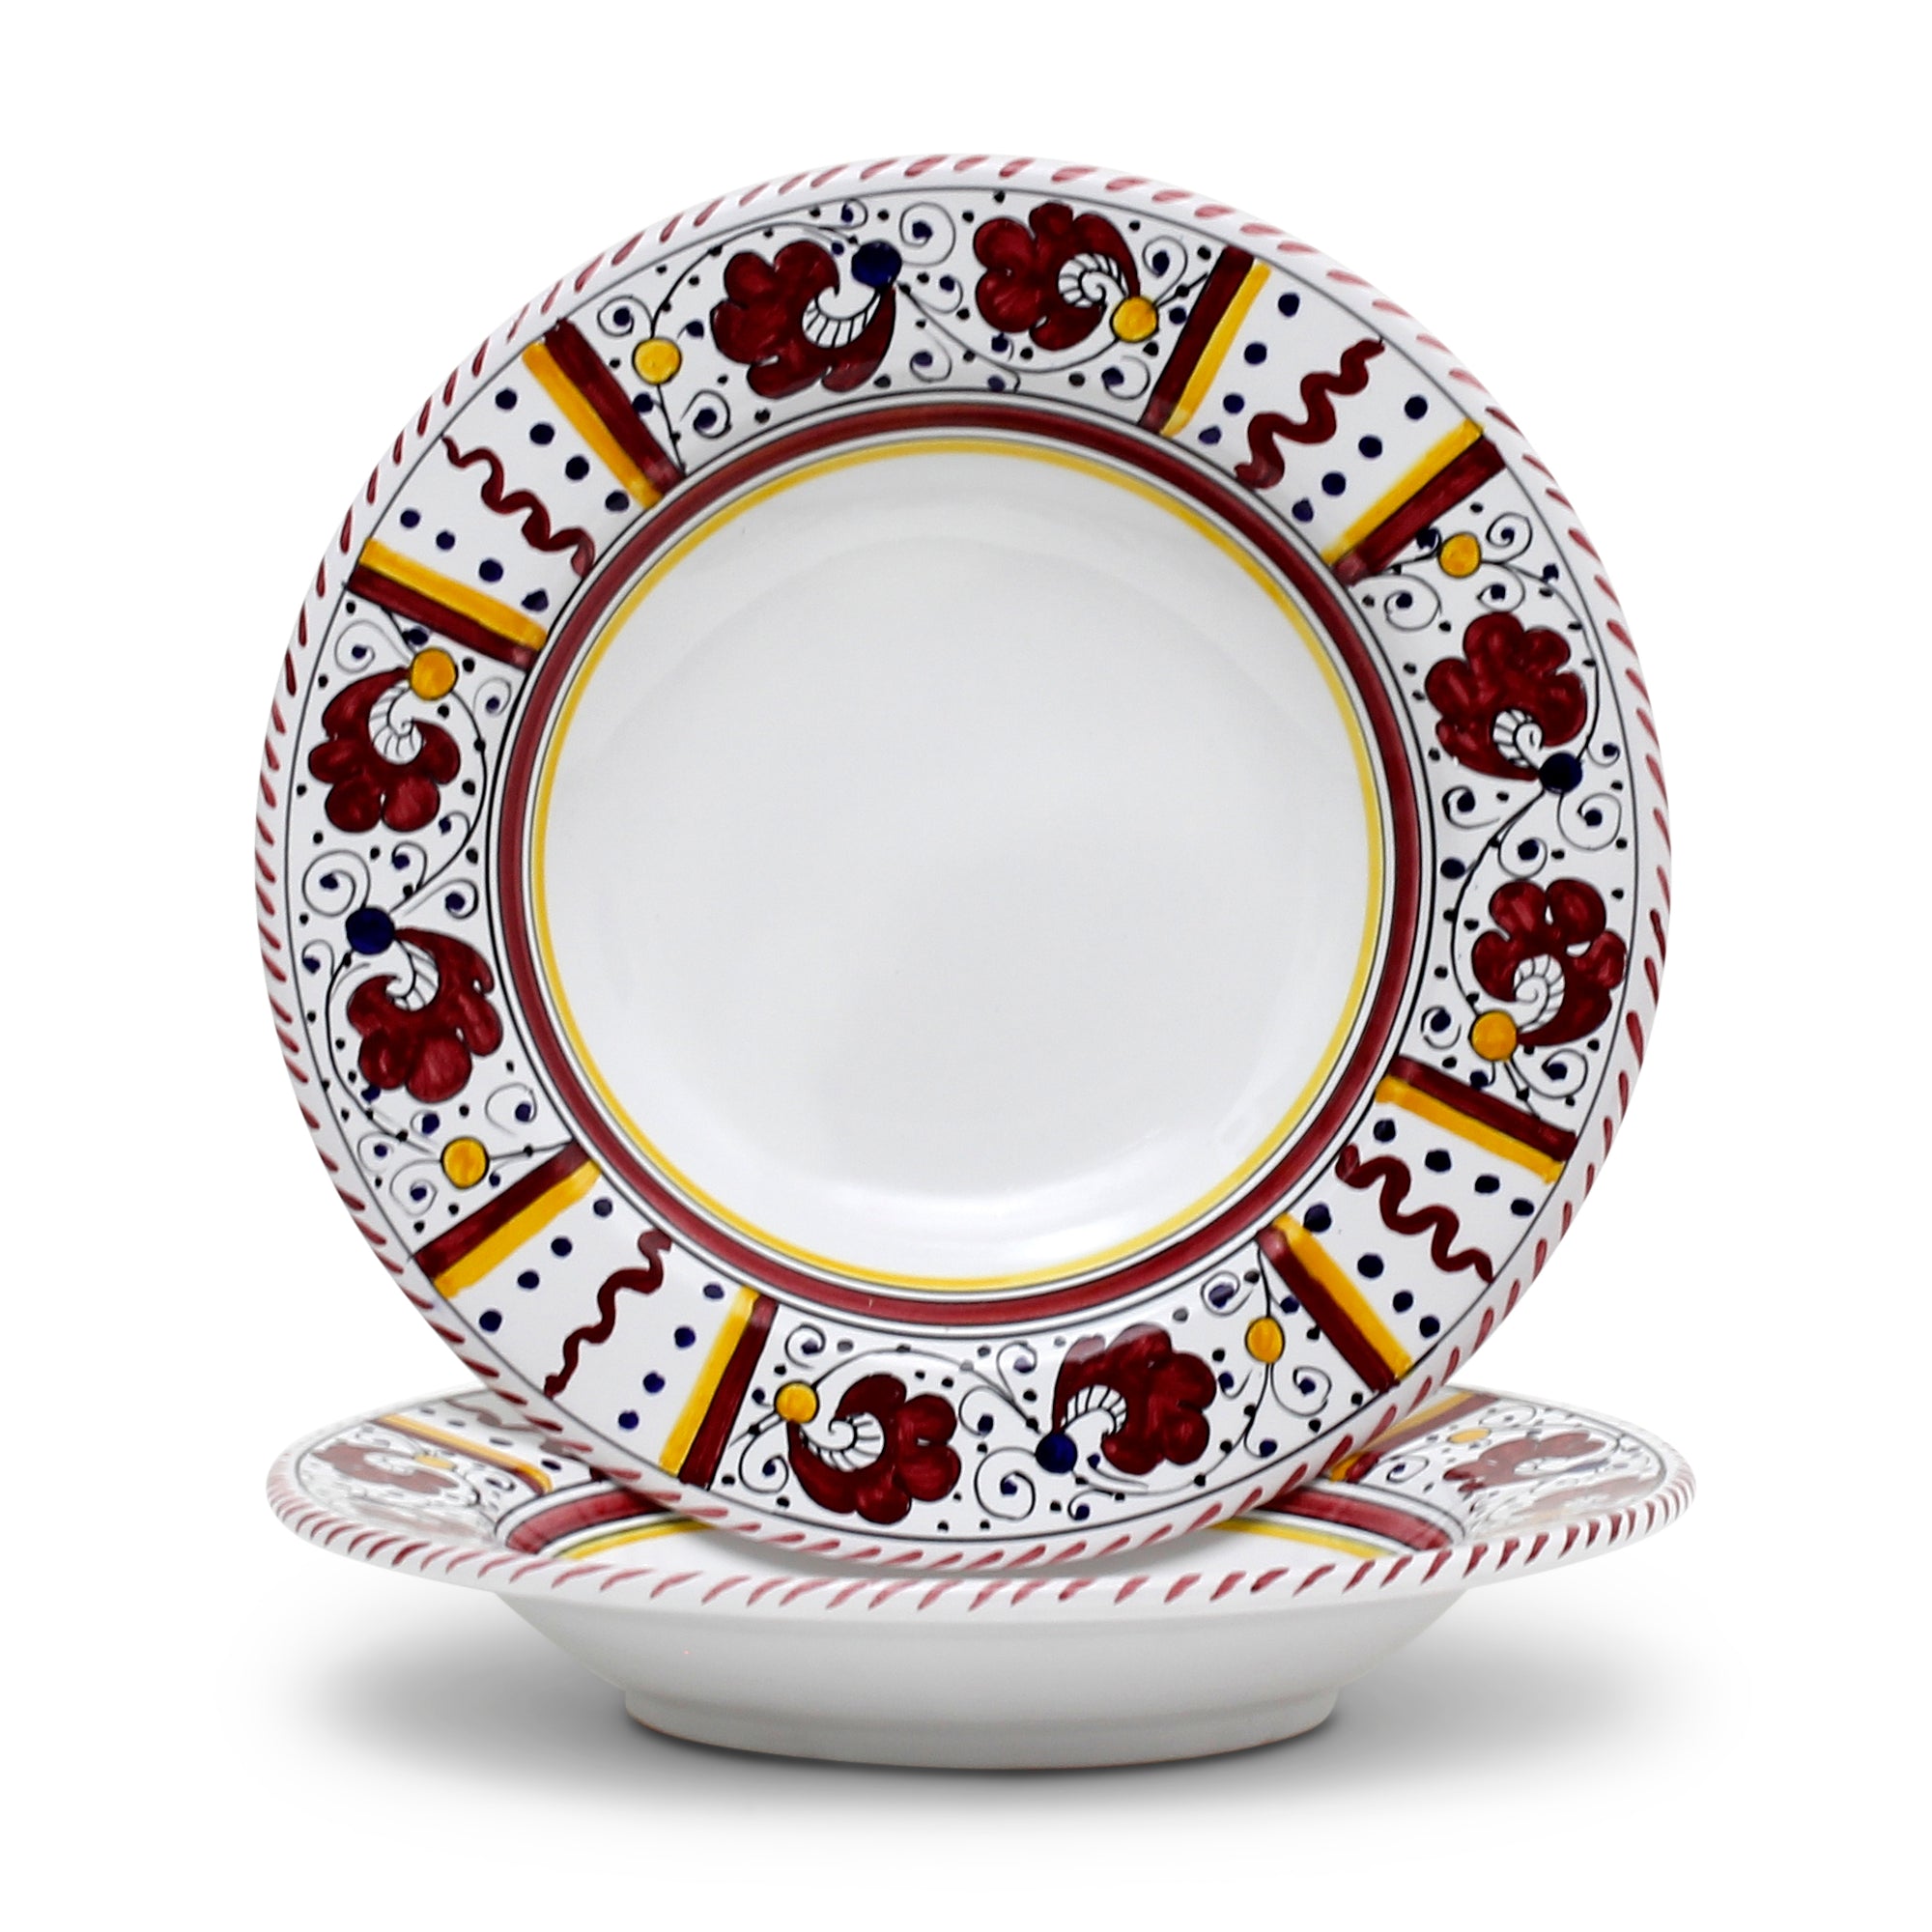 ORVIETO RED ROOSTER: 4 Pieces Place Setting - White center - Artistica.com